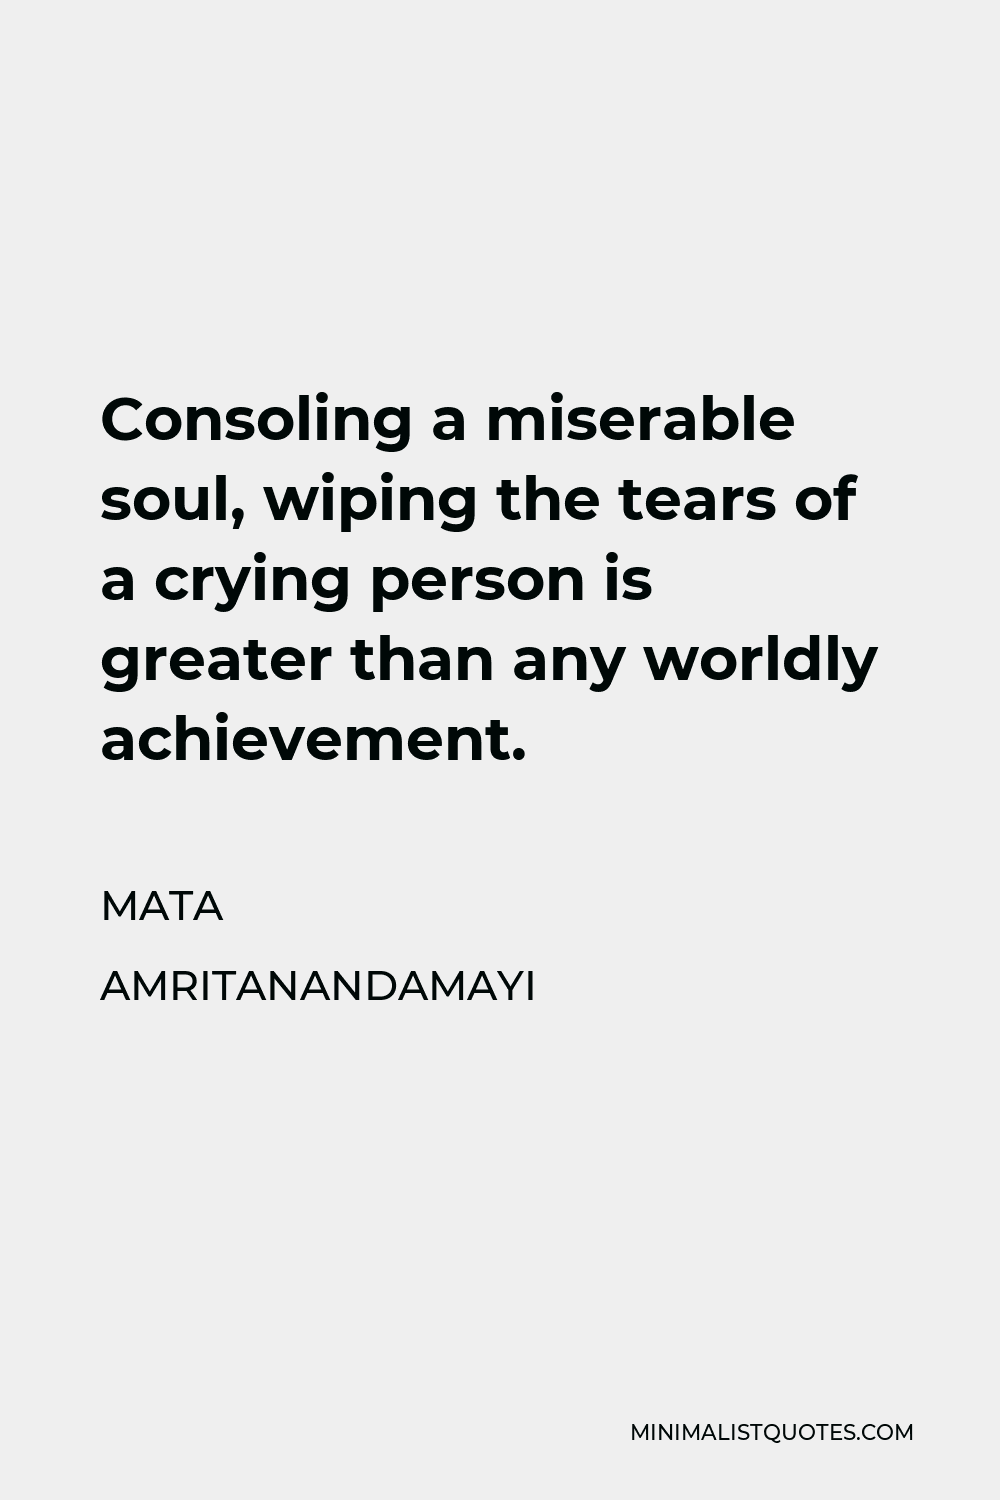 Mata Amritanandamayi Quote - Consoling a miserable soul, wiping the tears of a crying person is greater than any worldly achievement.